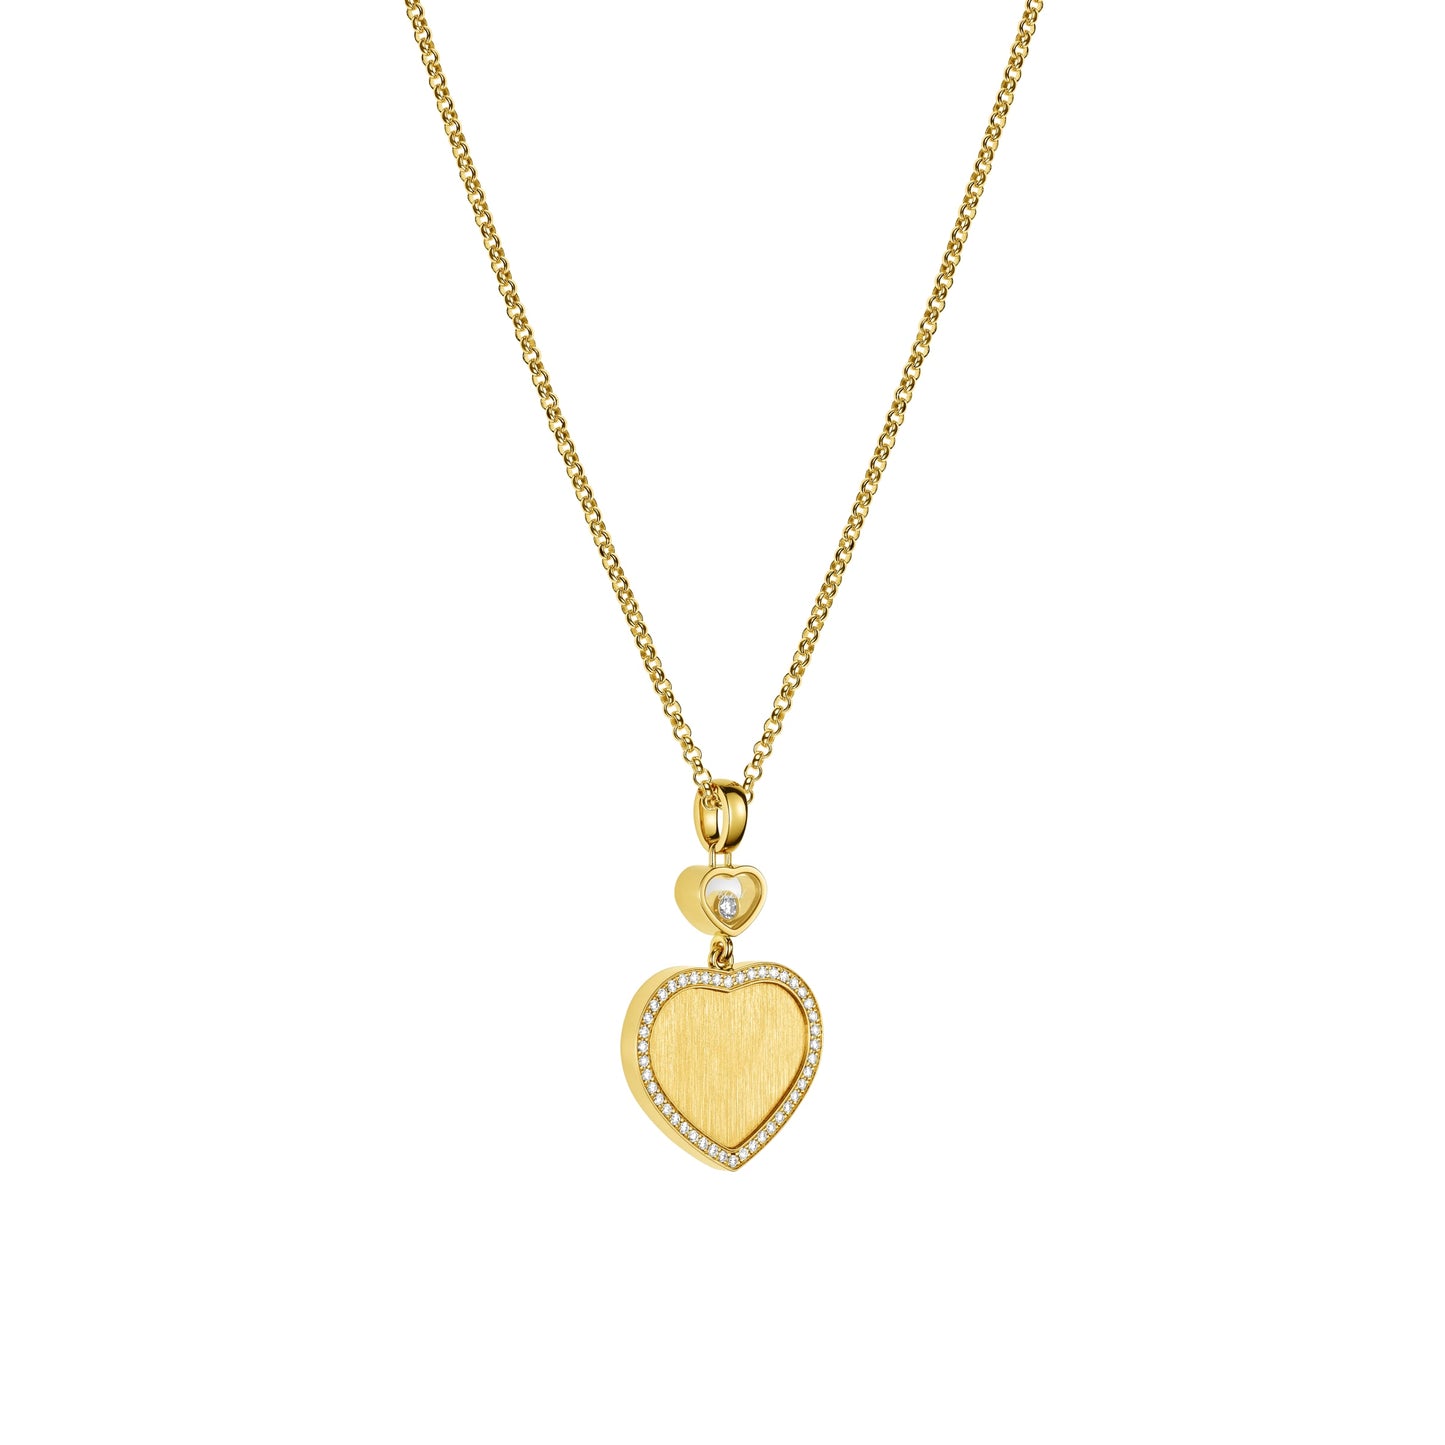 HAPPY HEARTS GOLDEN HEARTS PENDANT, ETHICAL YELLOW GOLD, DIAMONDS 79A107-0921